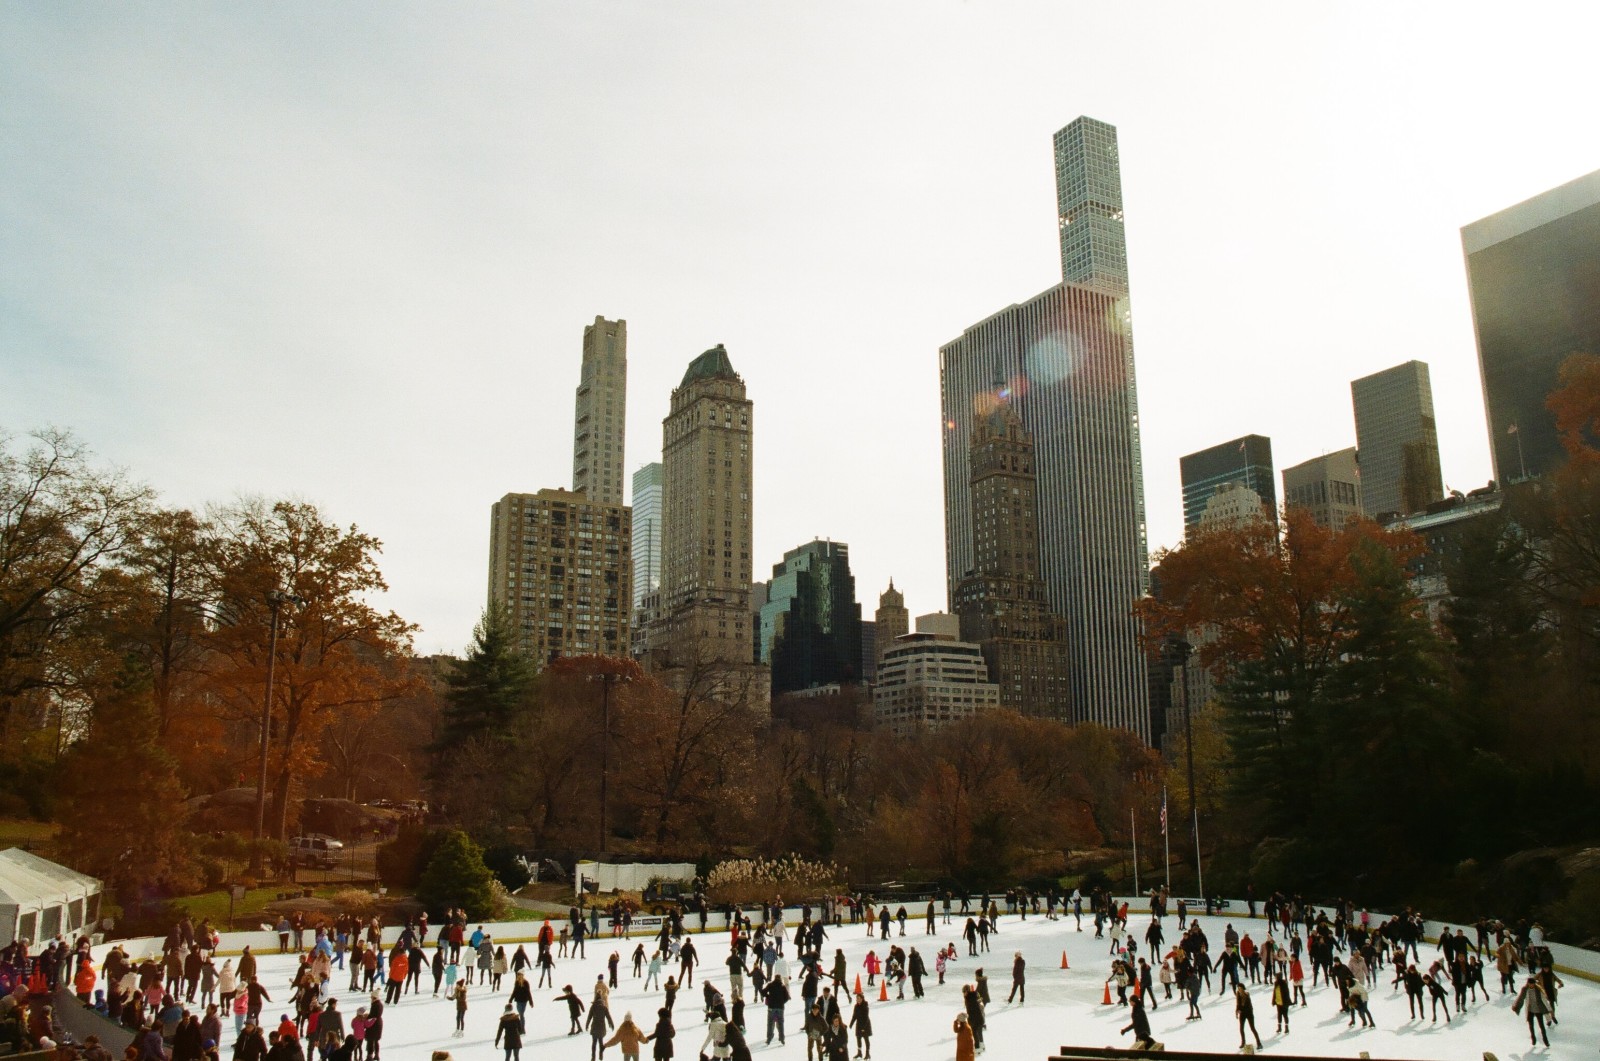 people on ice skating rink surrounded by buildings